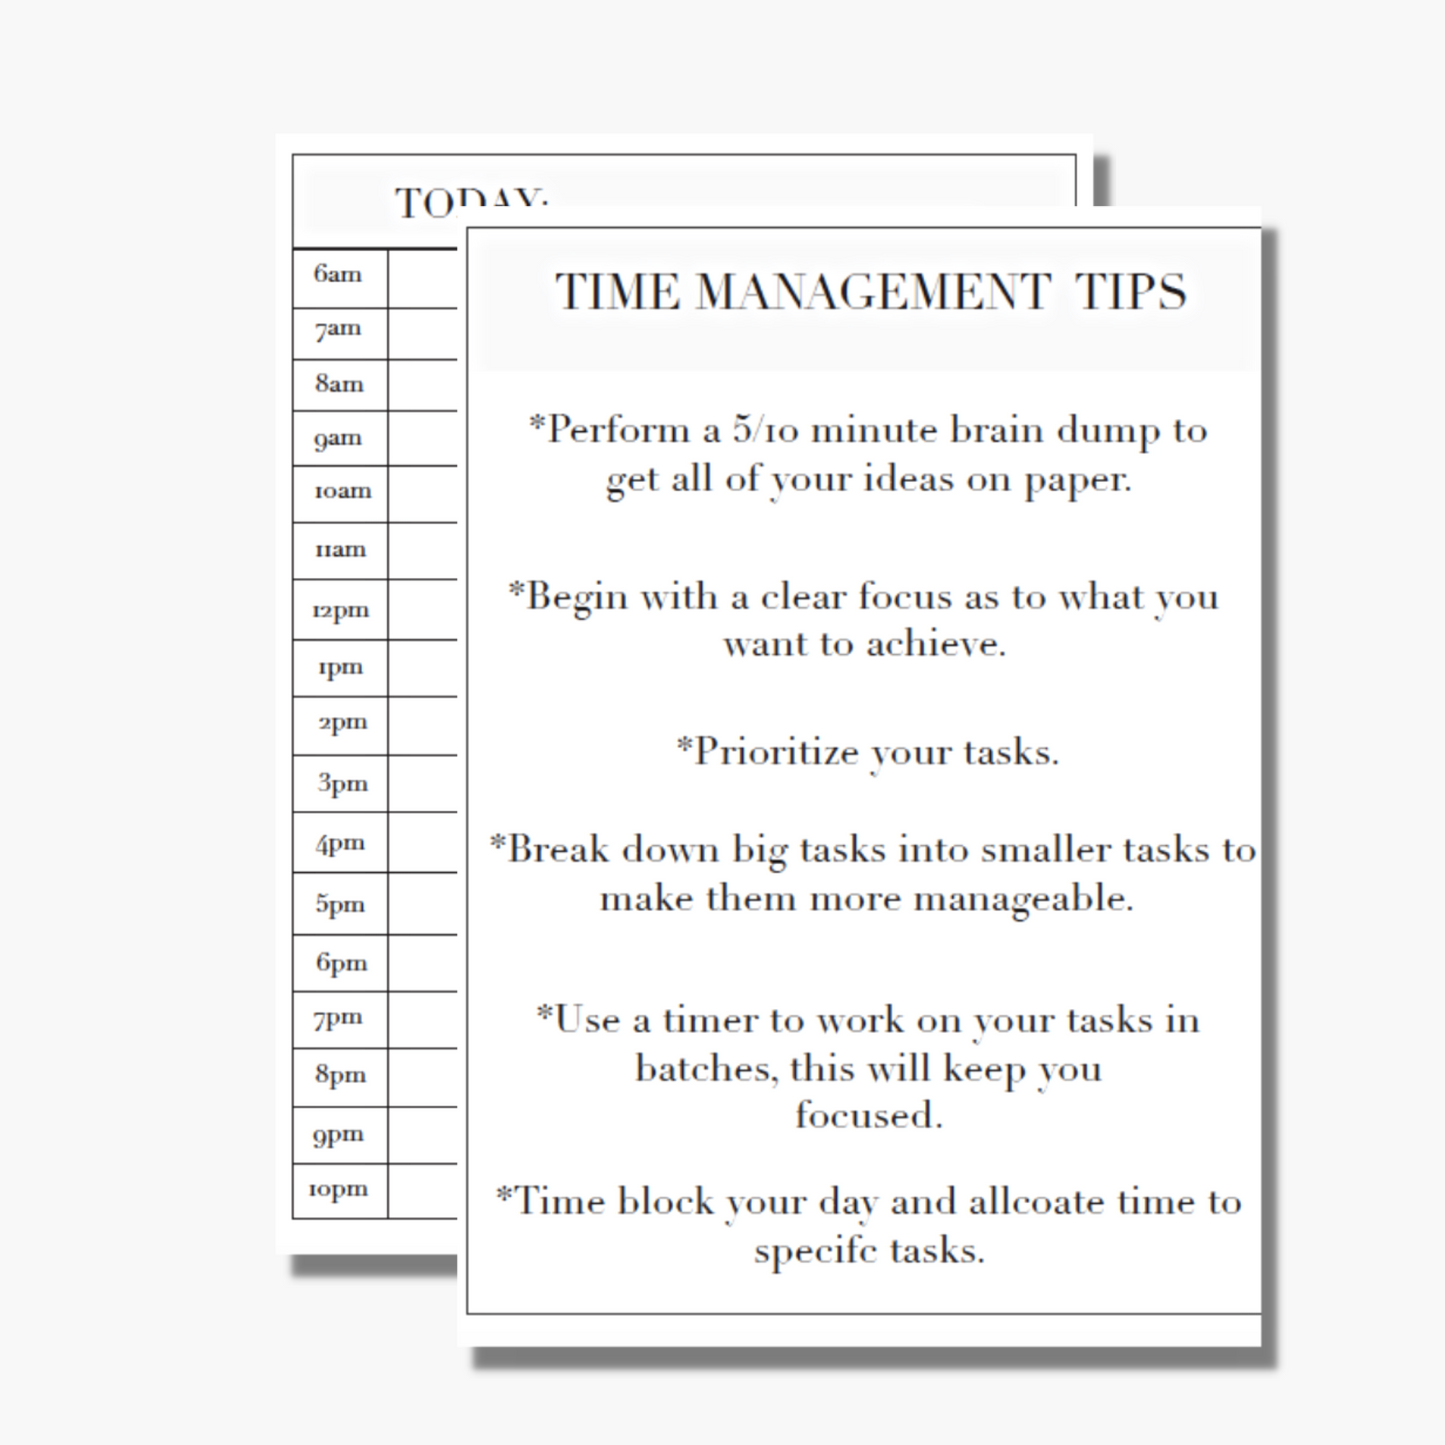 Time Management Tips & Time Blocking